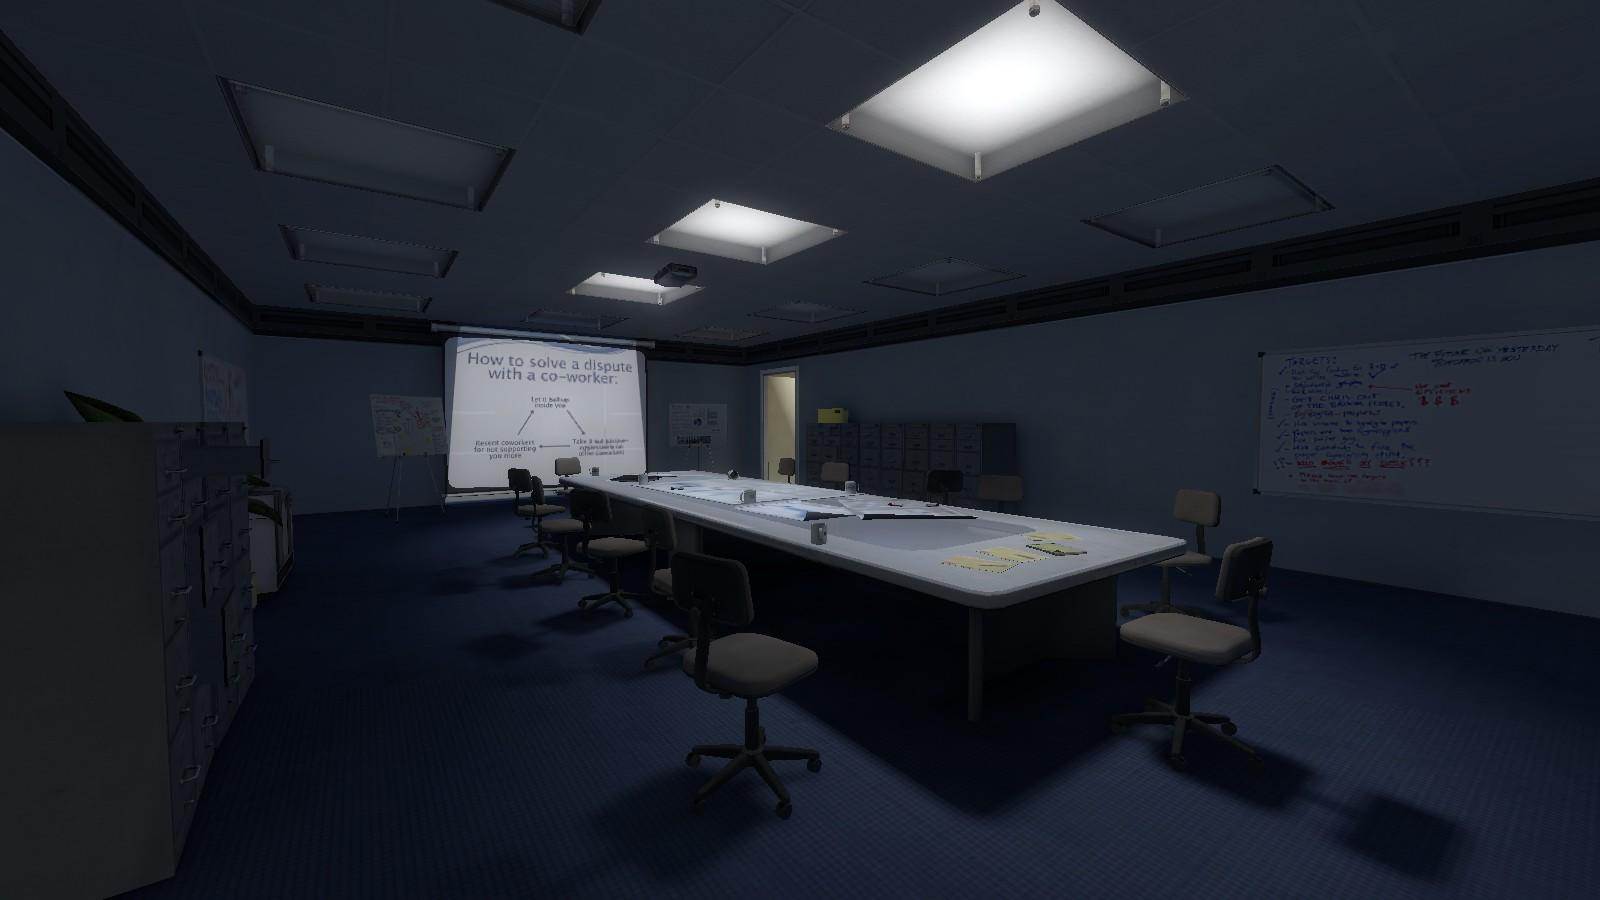 download the stanley parable torrent